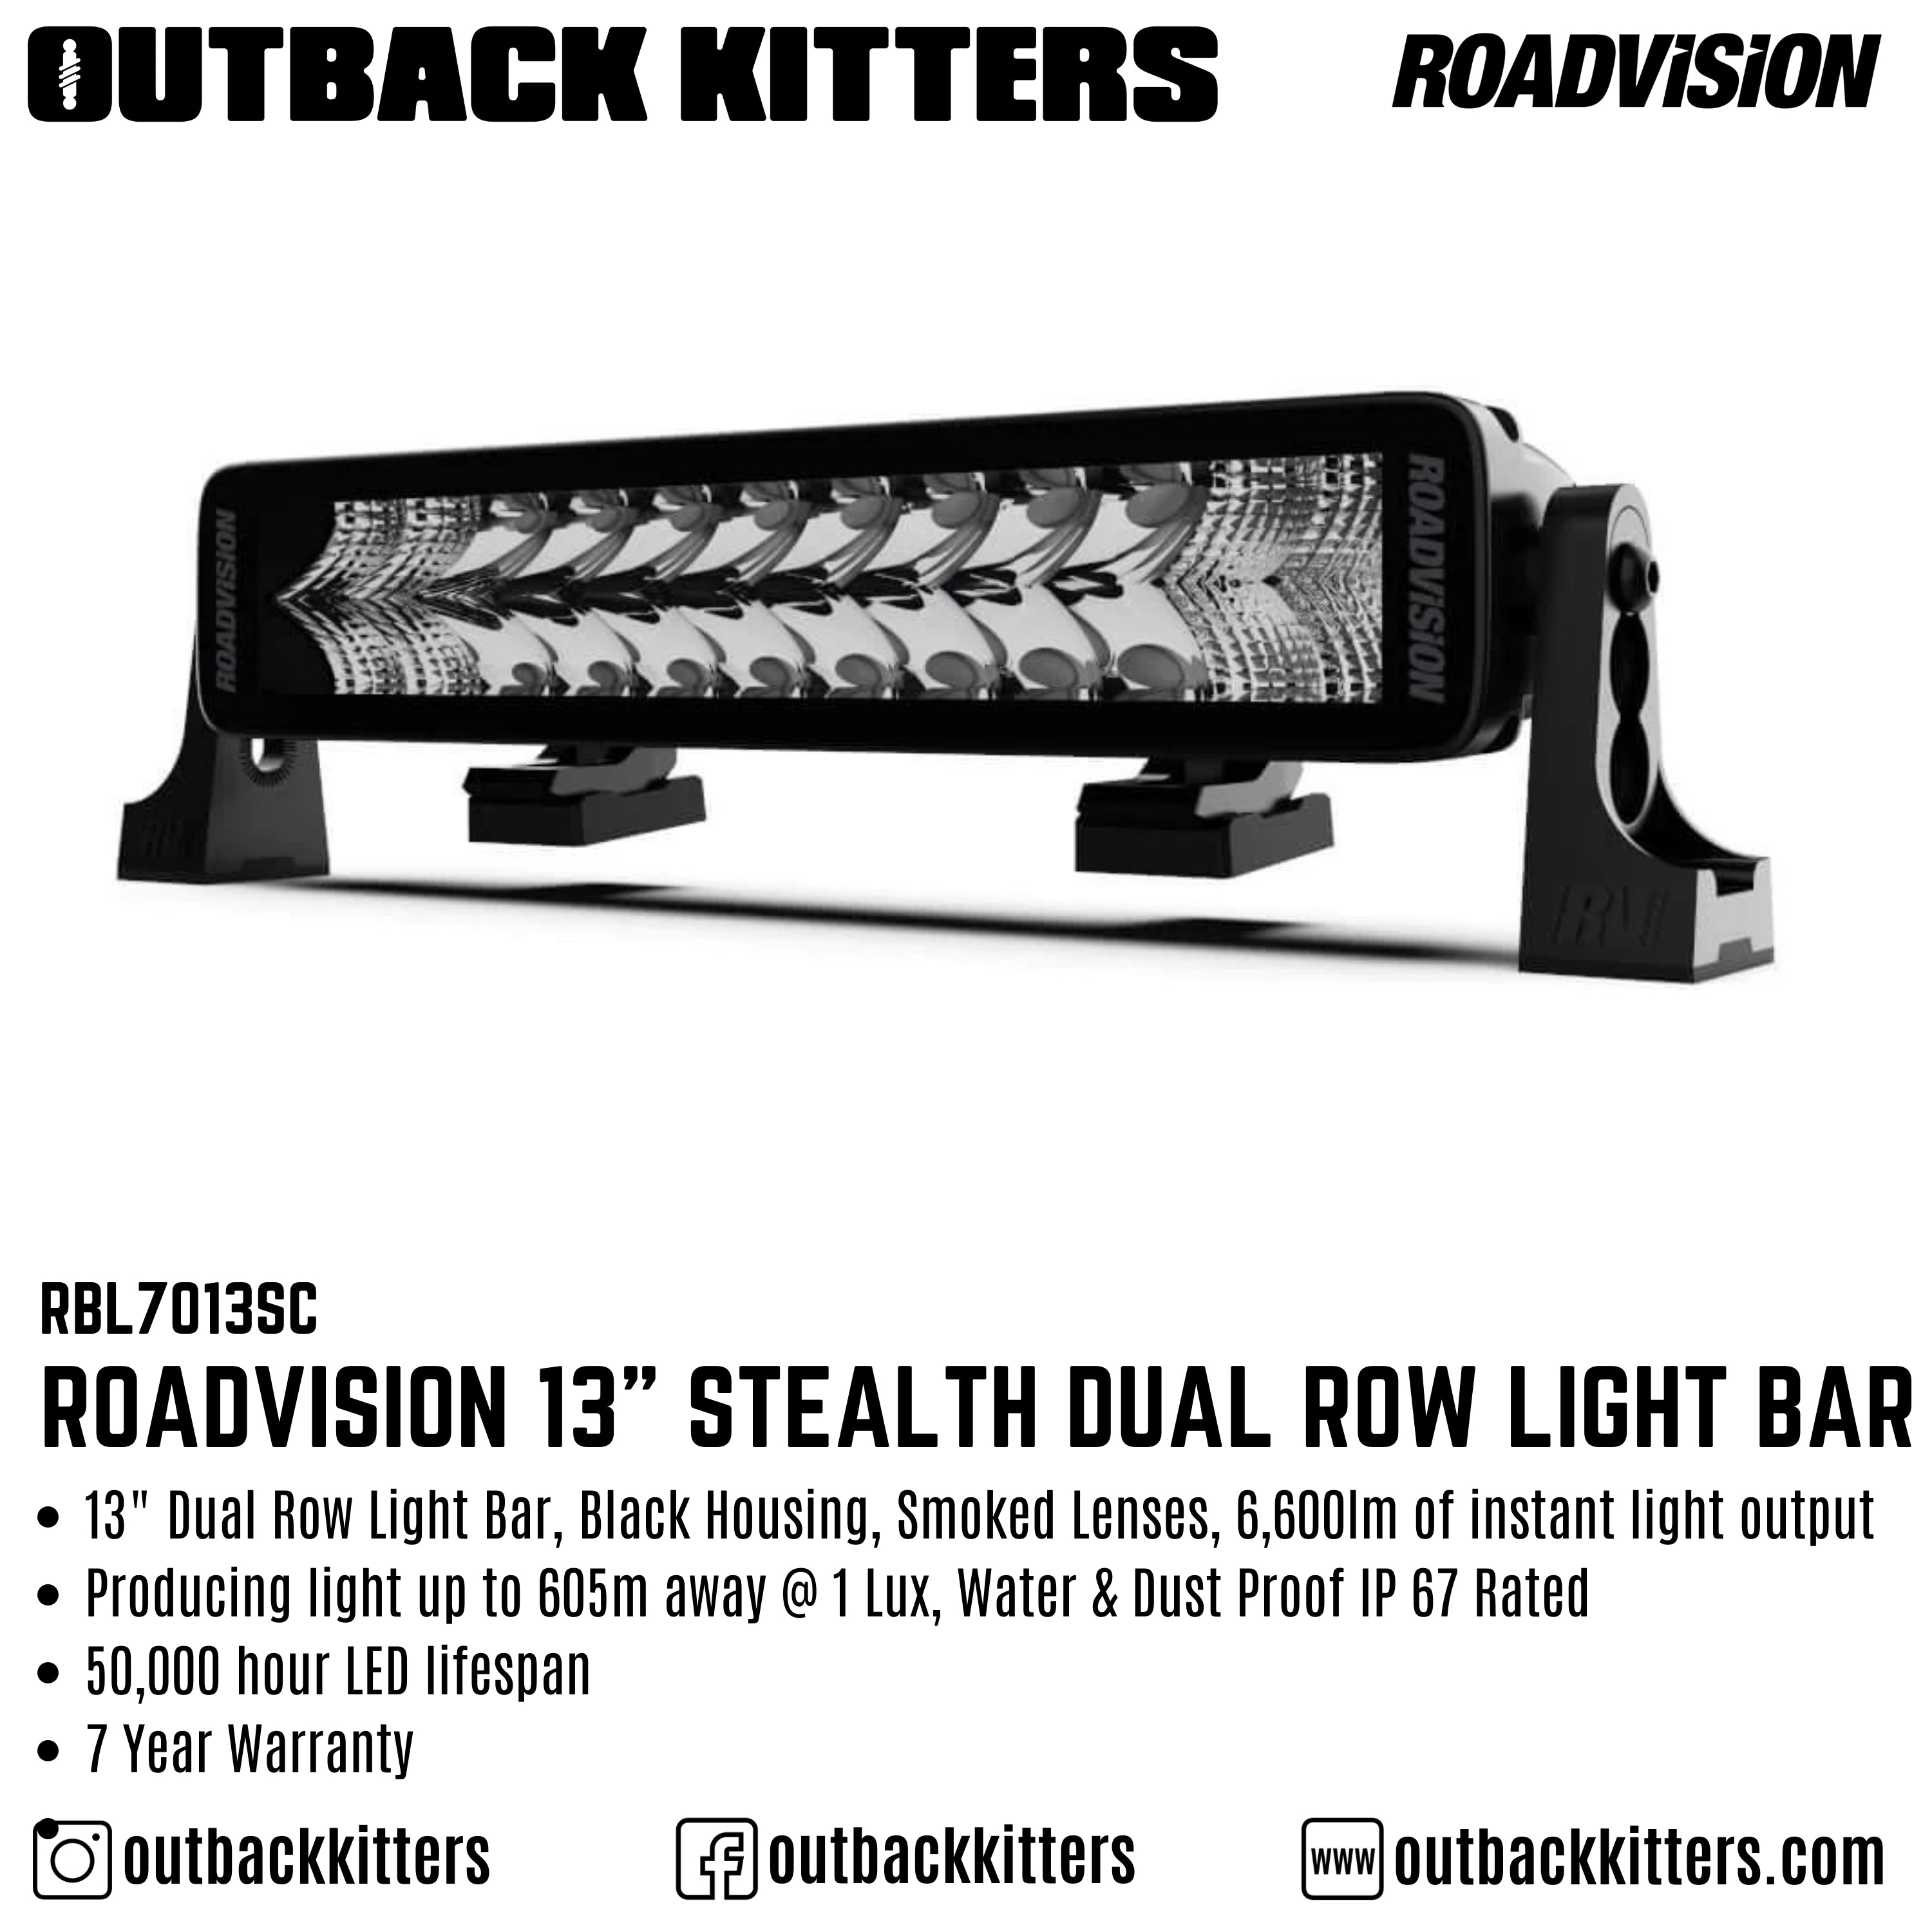 Roadvision 13" Stealth Dual Row Light Bar - Outback Kitters